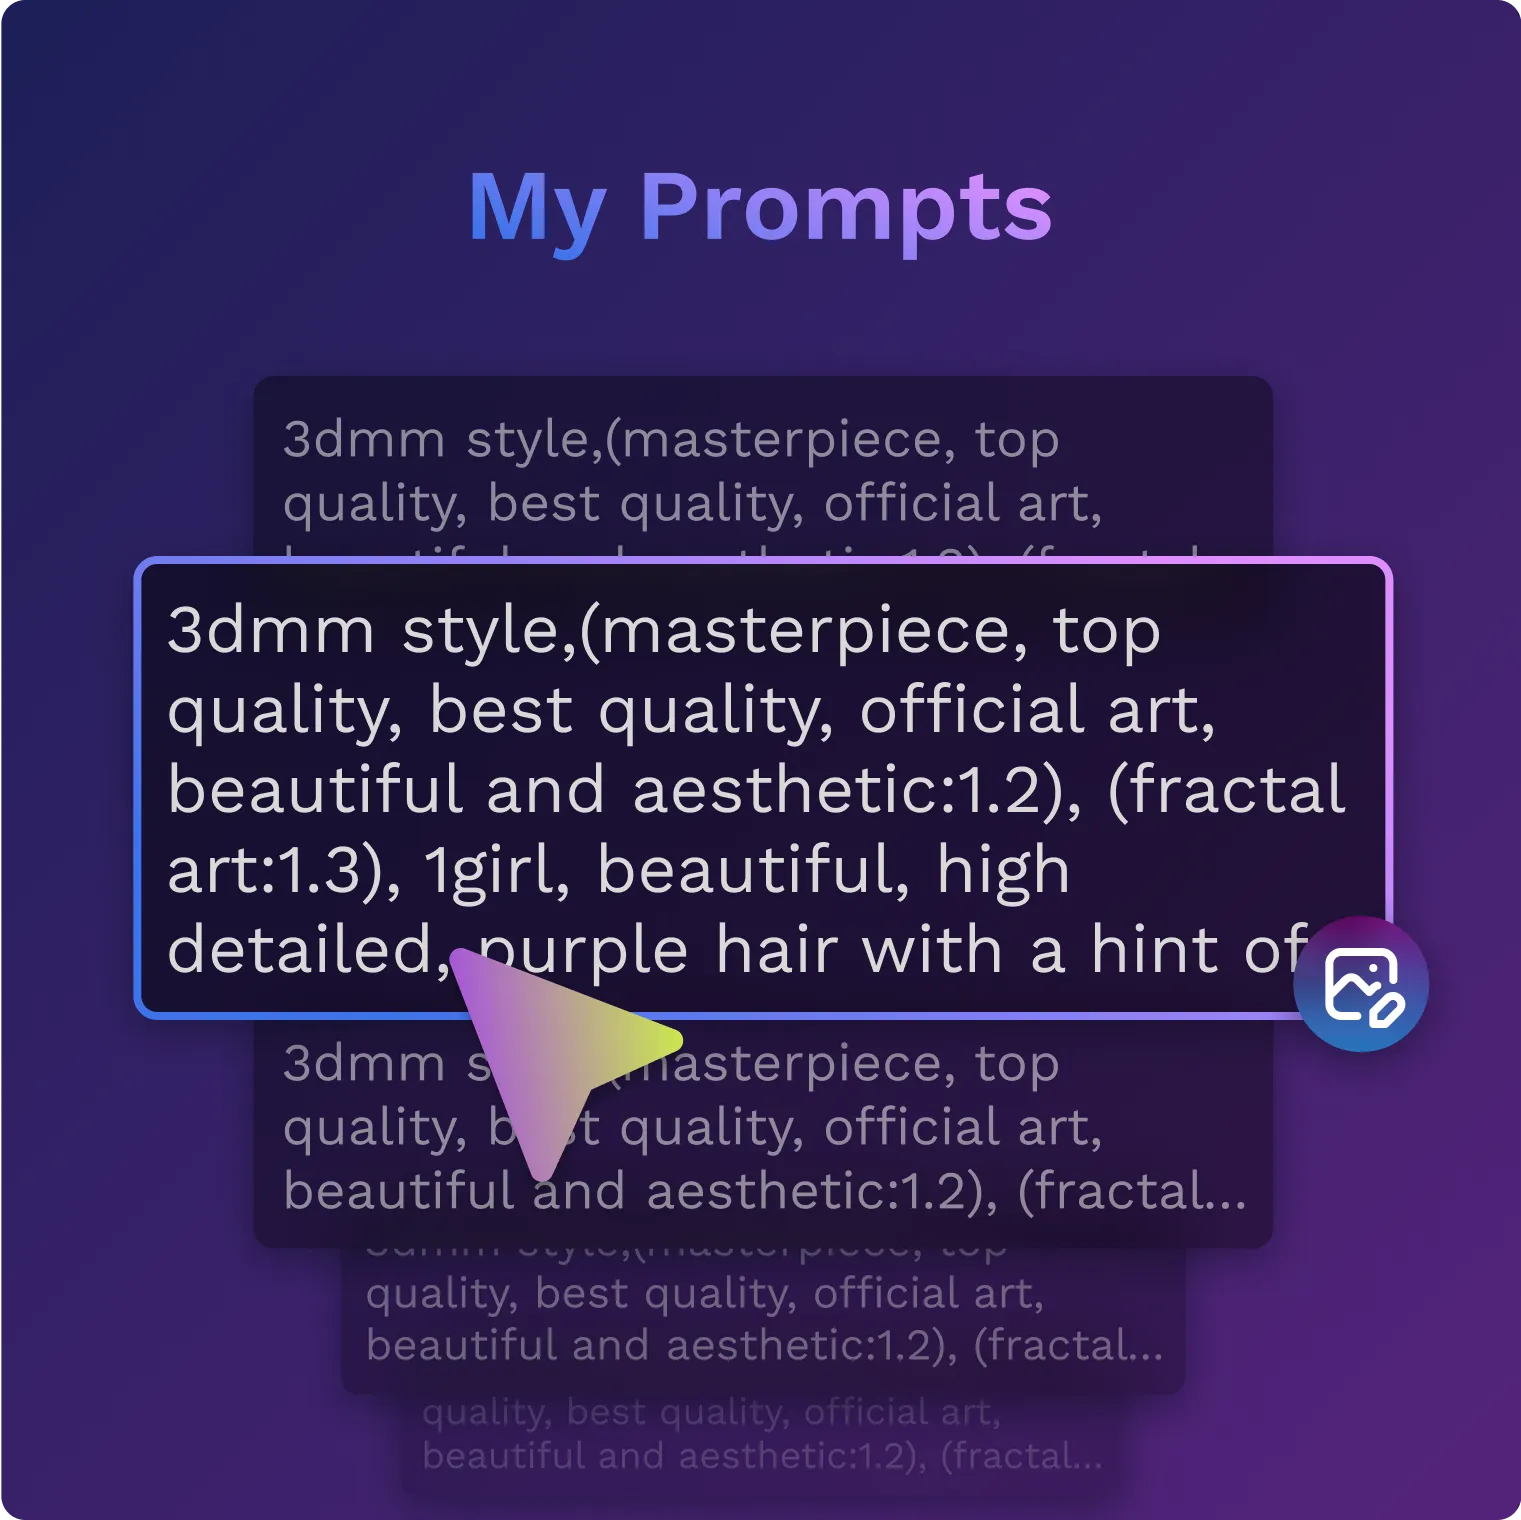 Manage Image Prompts